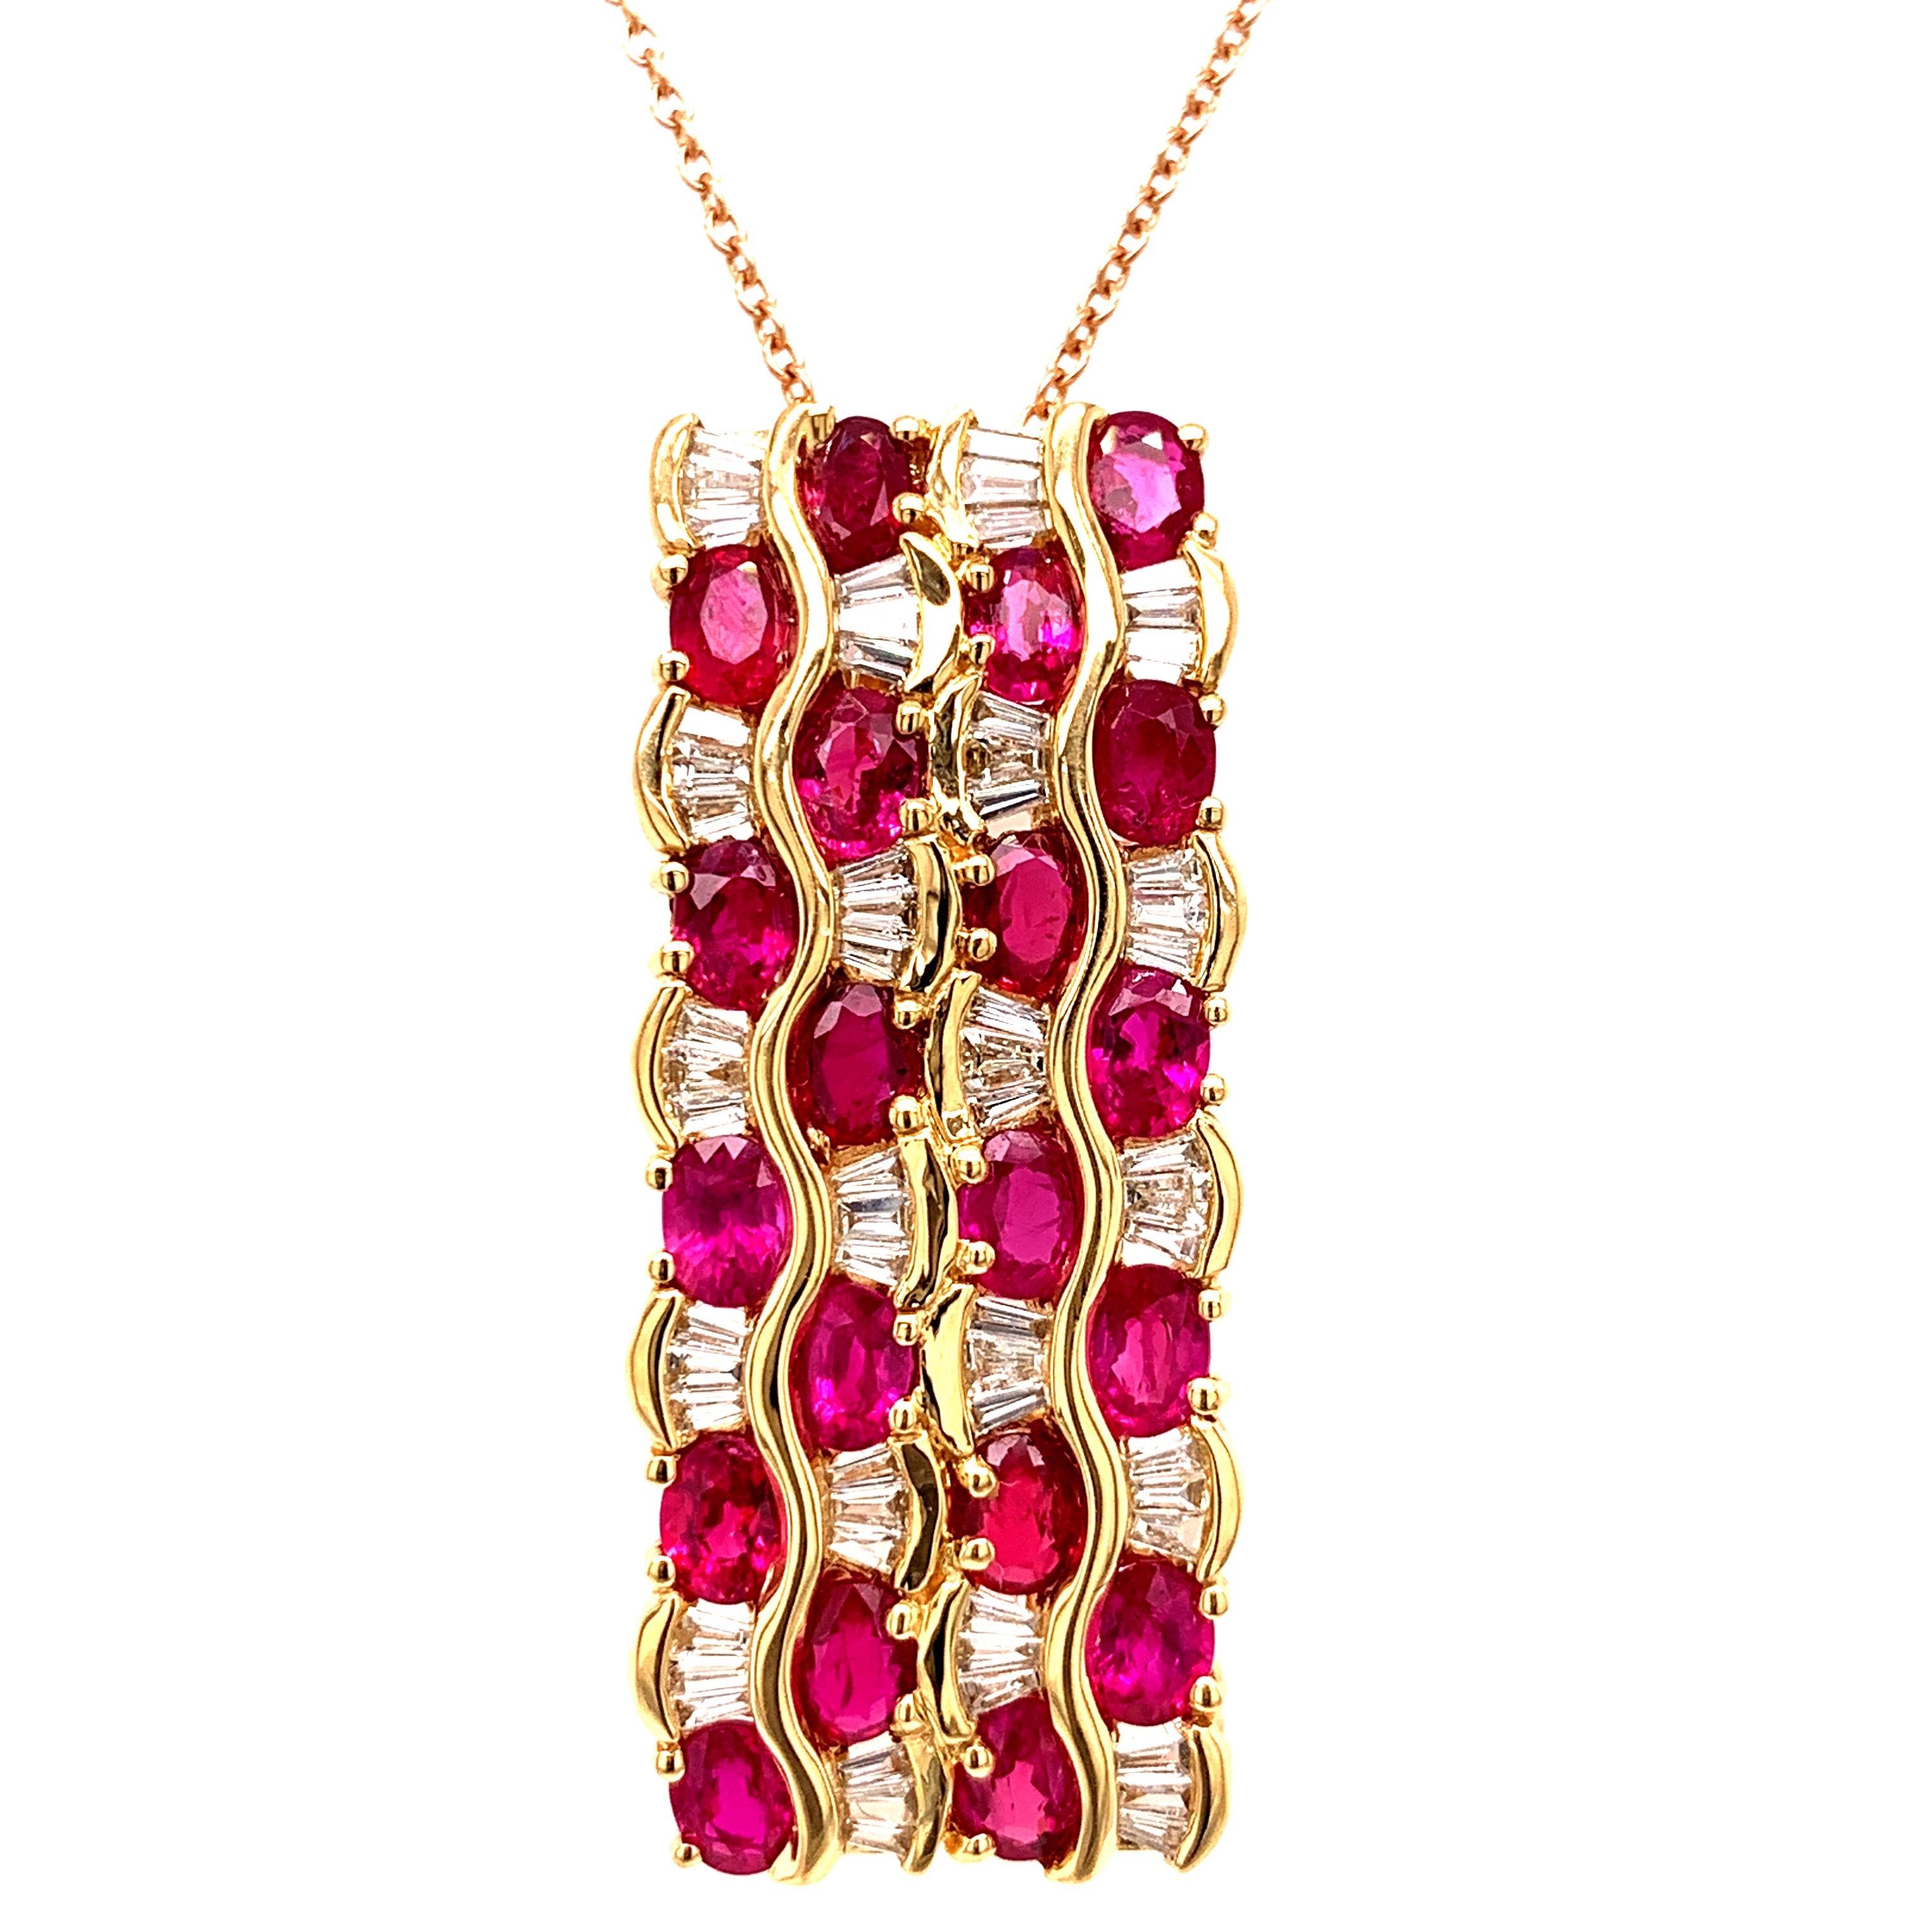 Contemporary design ruby diamond pendant. Lively, deep red with high brilliance, oval faceted, 4.52 carats natural rubies mounted with beads prongs, accented with baguette-cut diamonds. Handcrafted water cascade design set in 18 karats rose gold